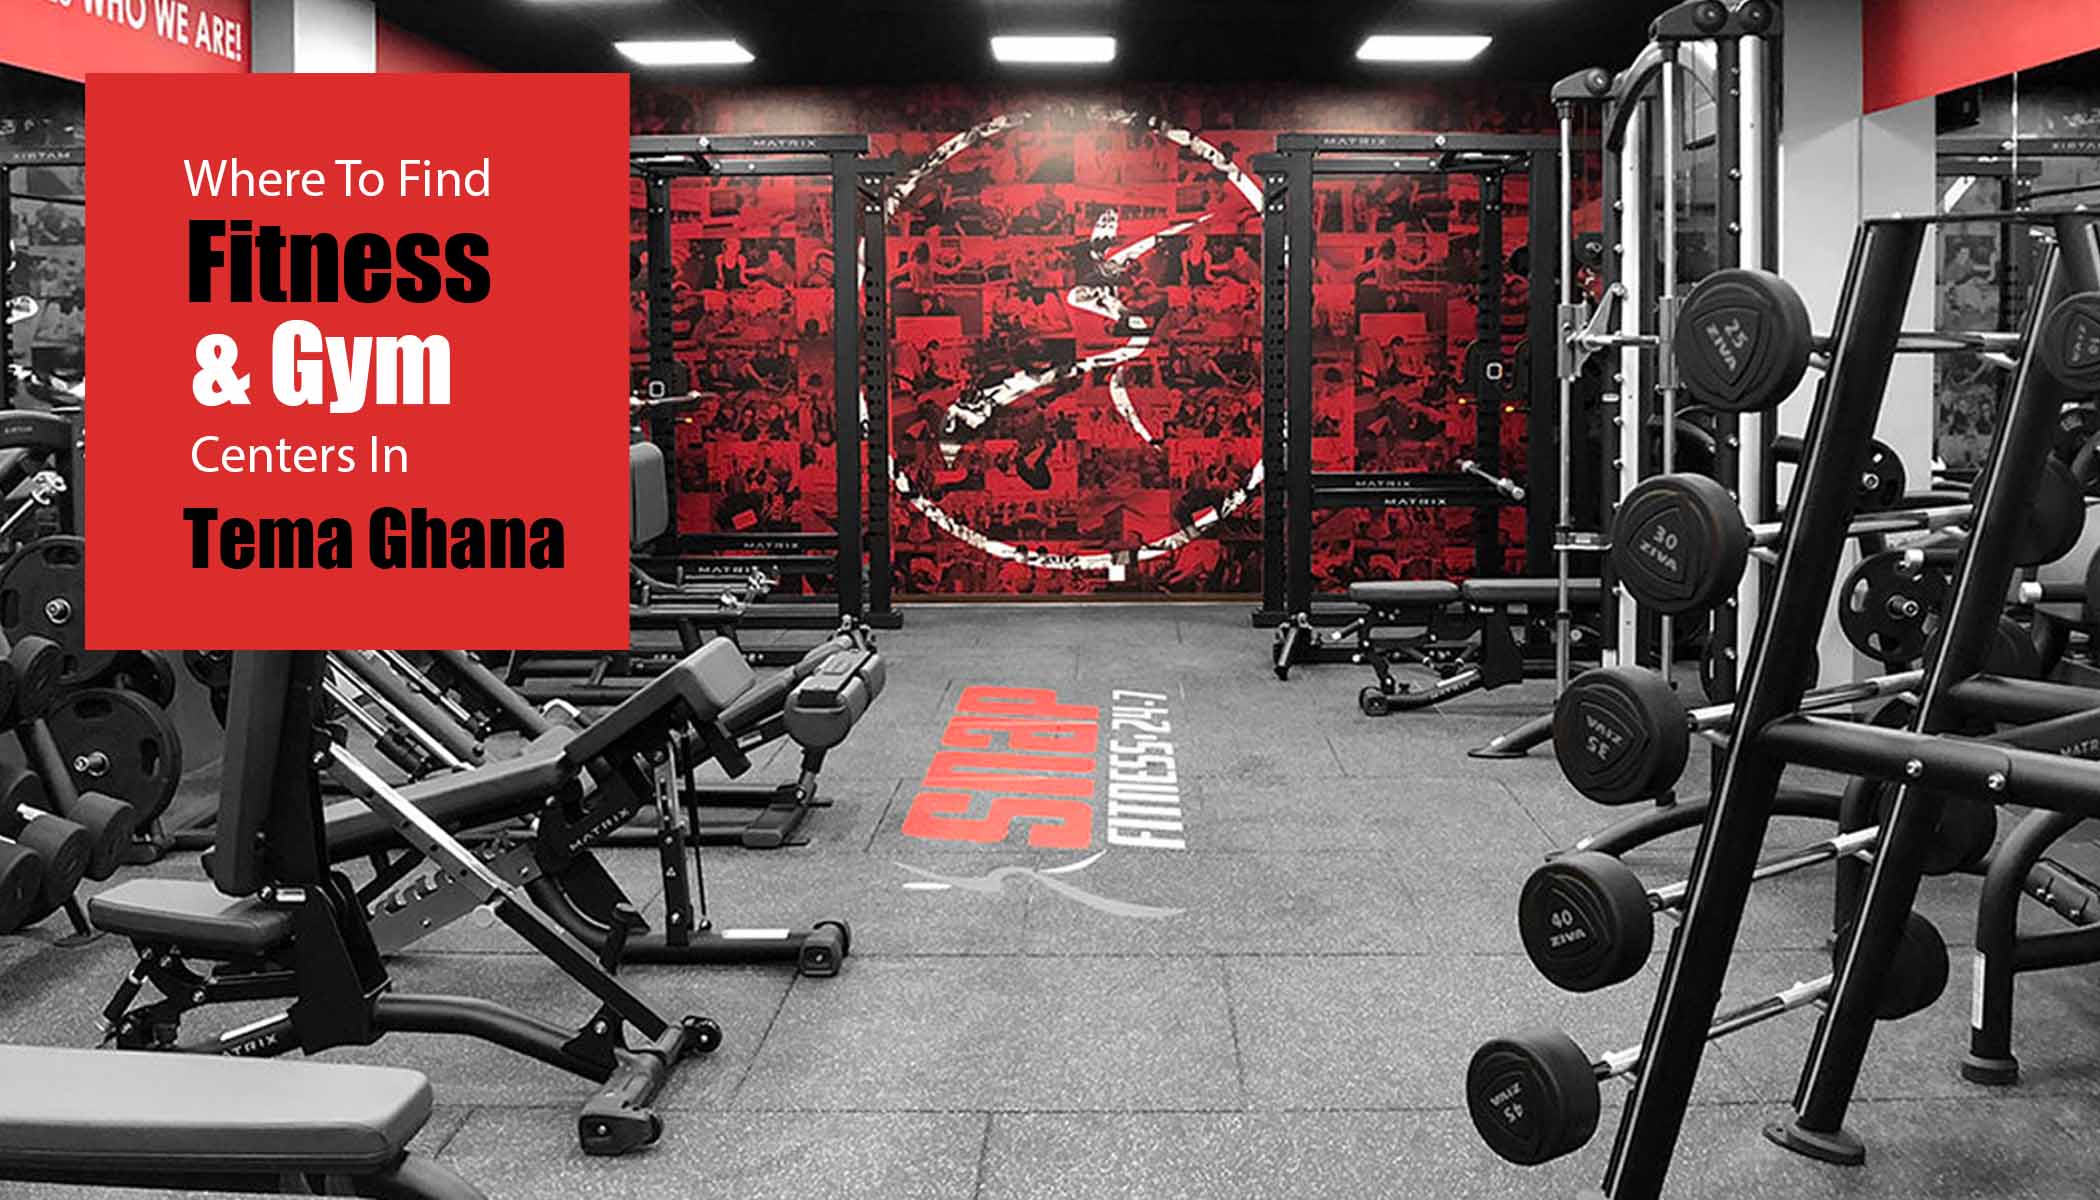 Where to Find Fitness and Gym Centers in Tema Ghana